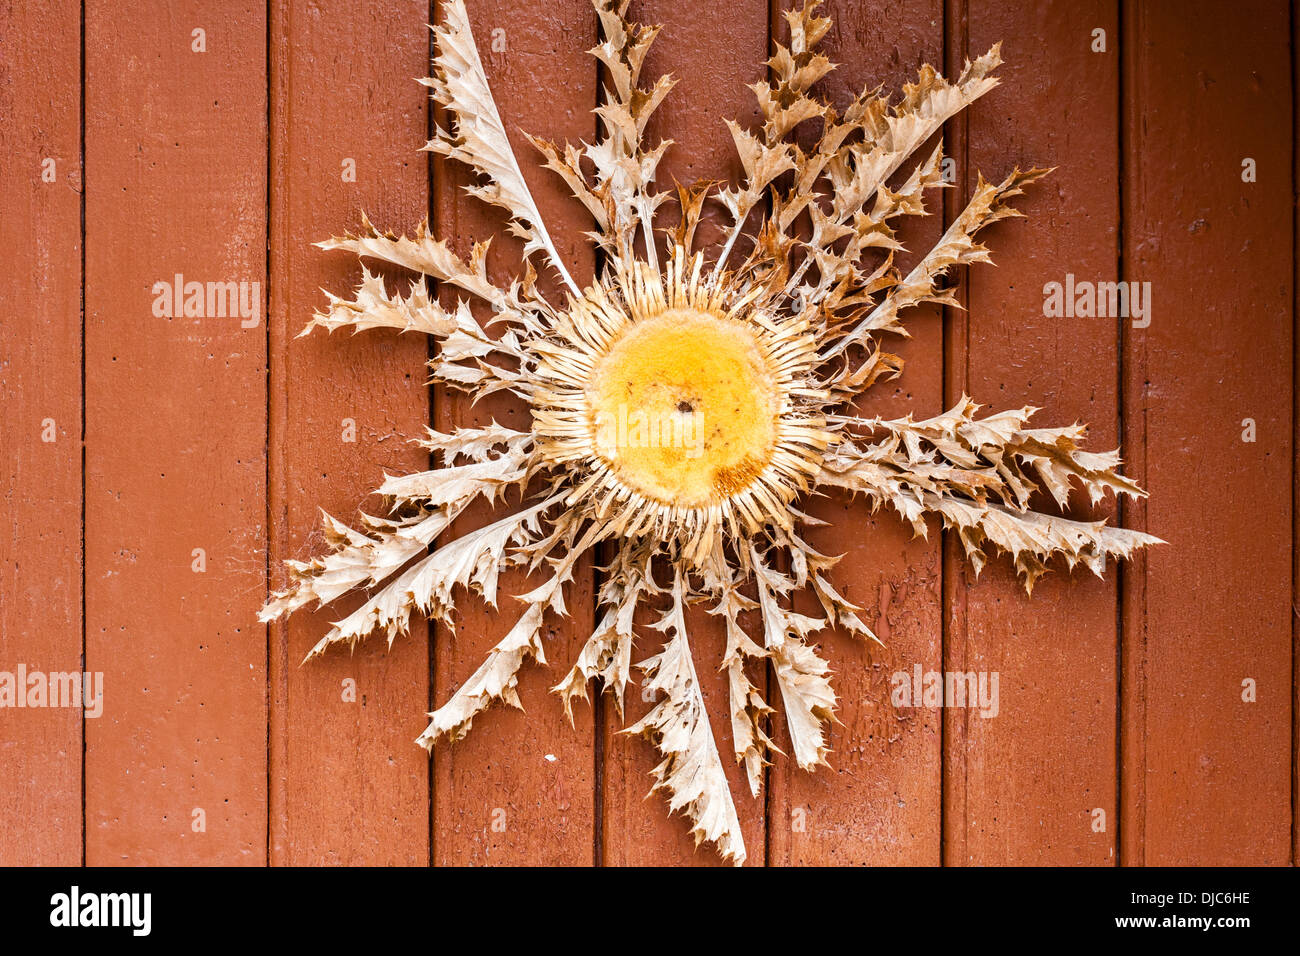 Dried Cardabelle Flower on door of house in Saint-Guilhem-le-Désert, Languedoc-Roussillon, France Stock Photo